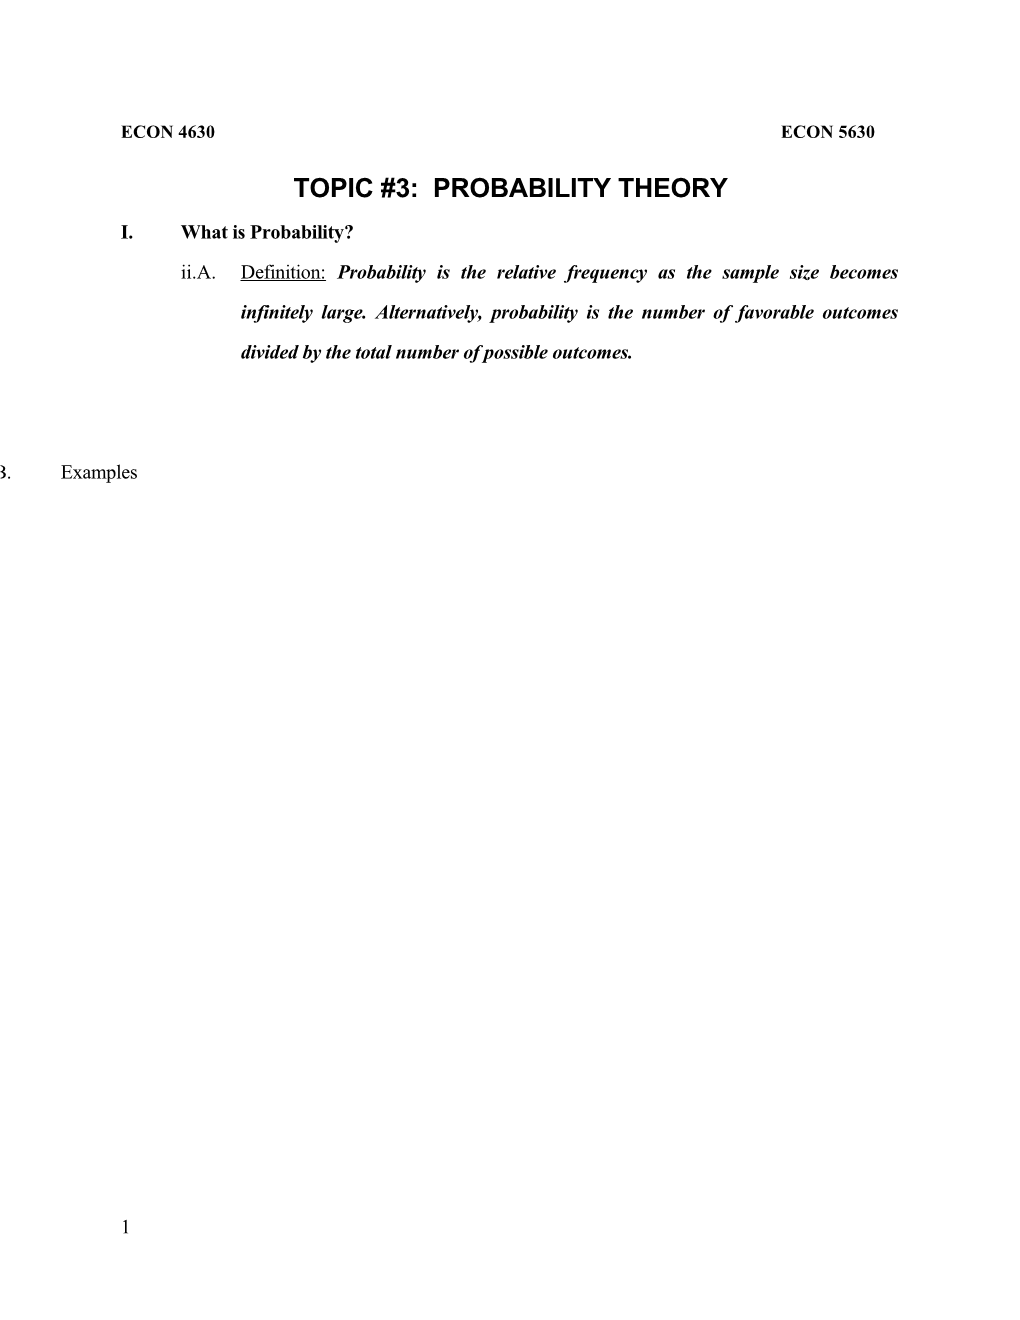 Topic #3: Probability Theory